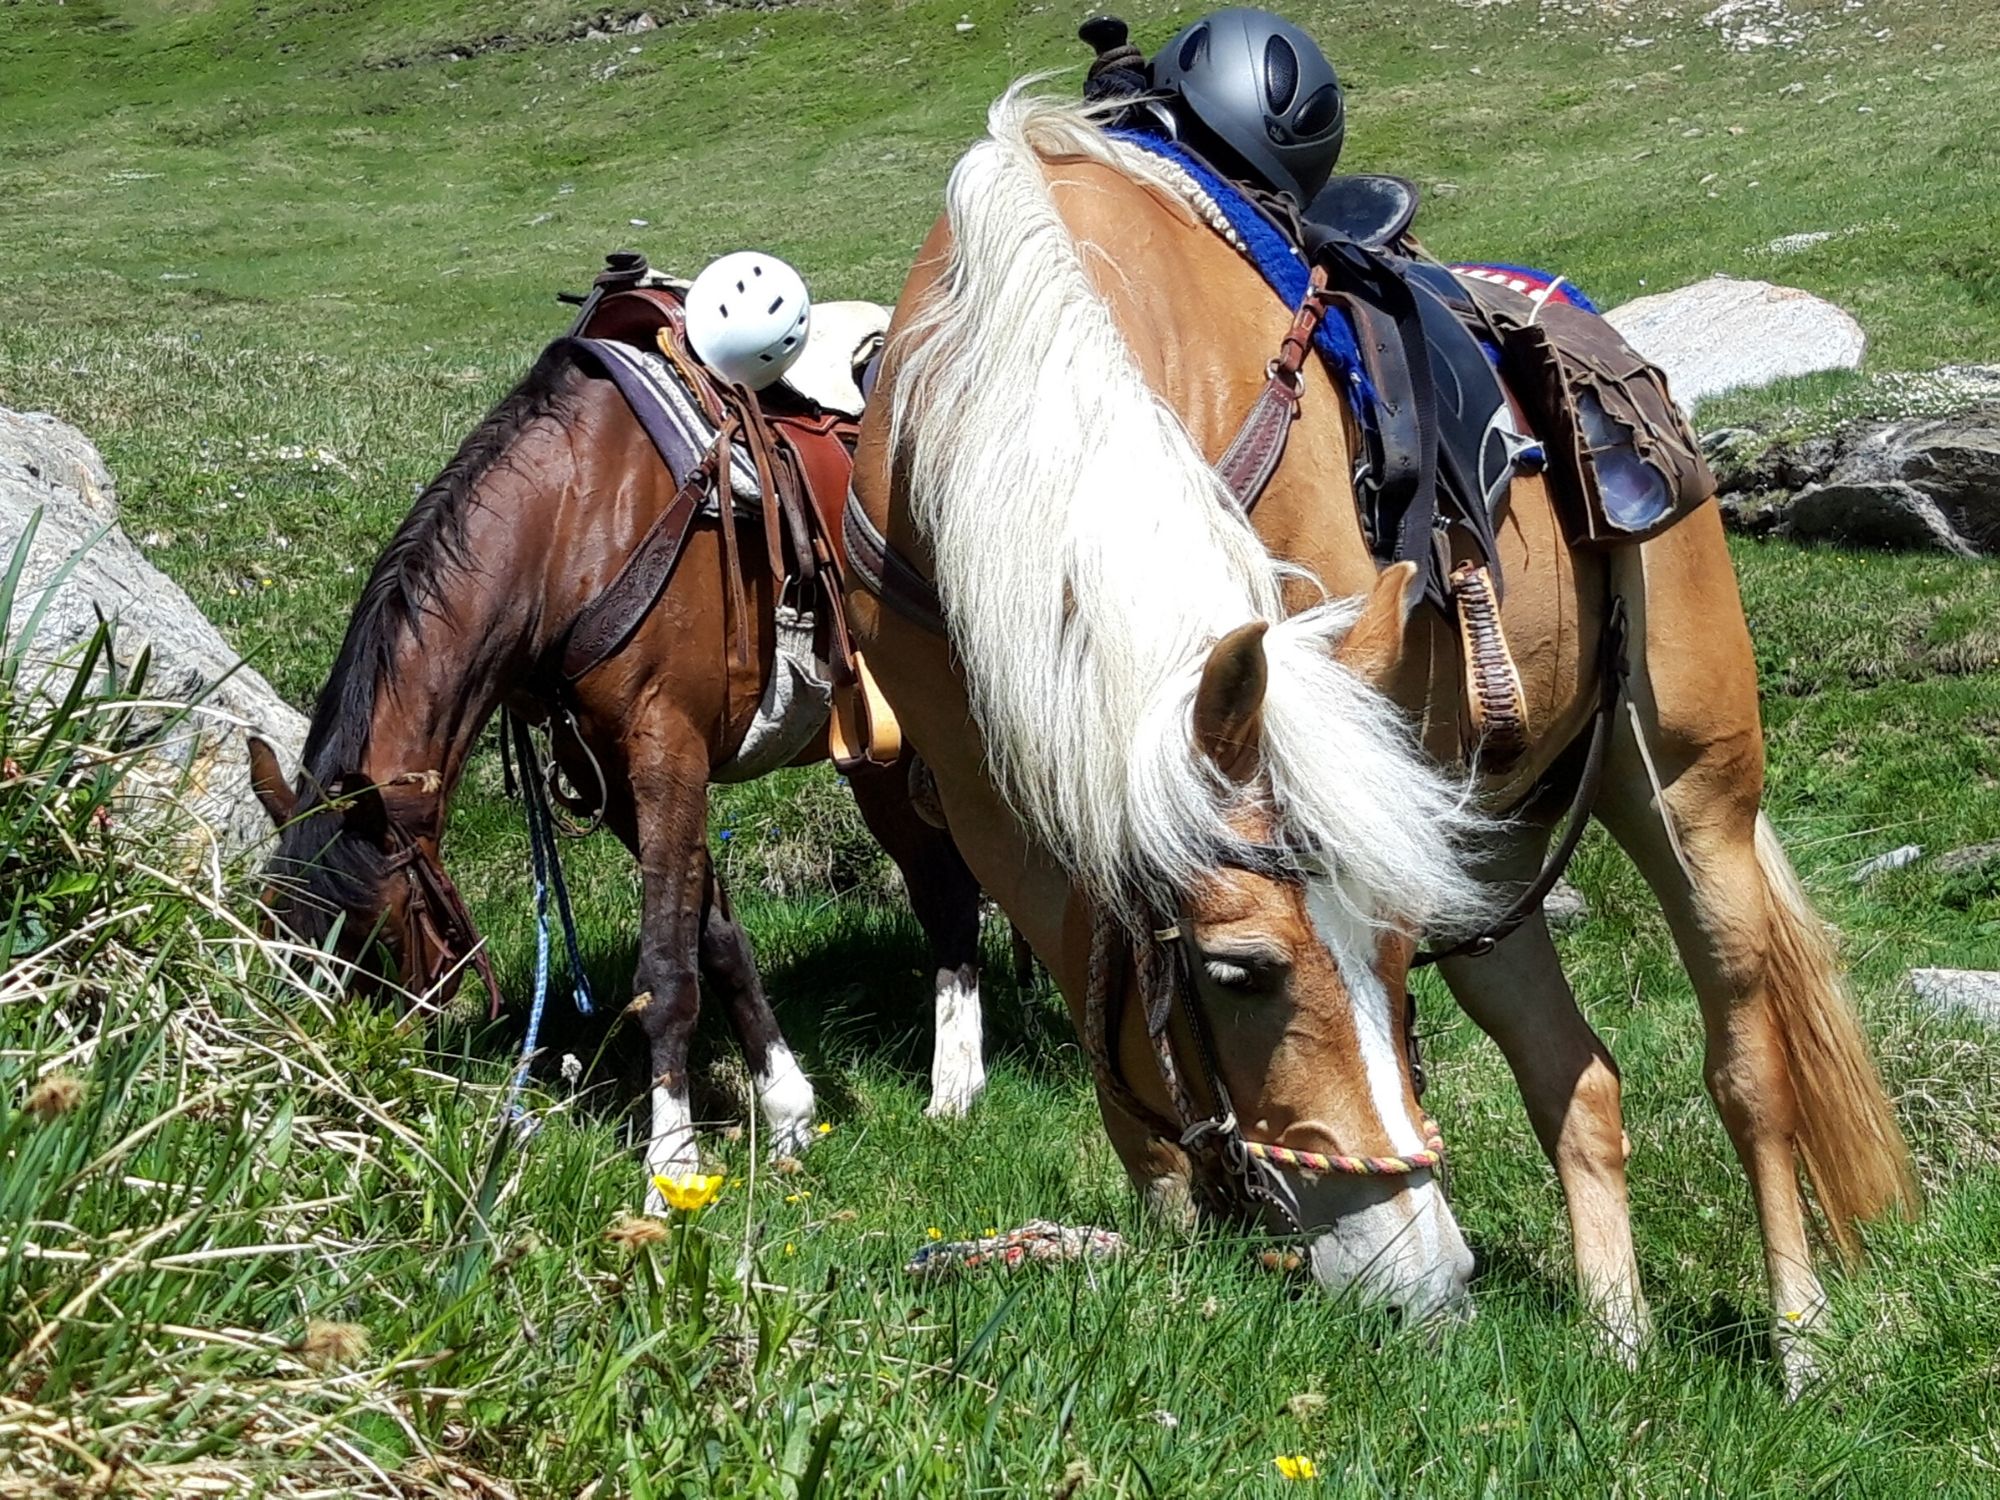 Riding lessons at the Bacherhof in Pfitsch near Sterzing, South Tyrol